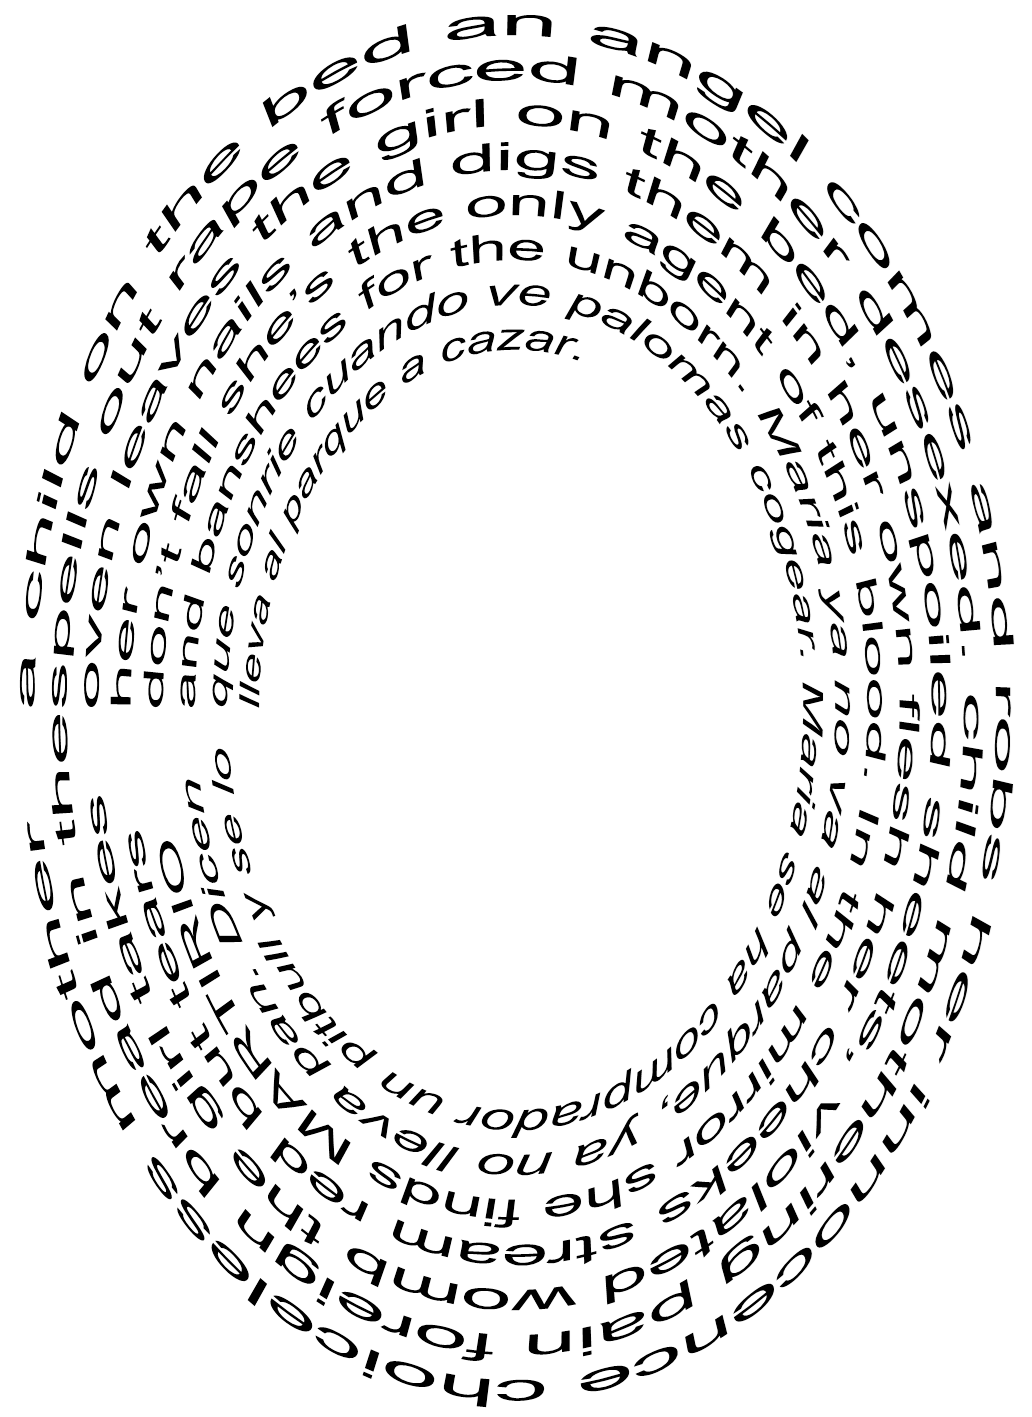 image of the poem Mandorla formatted in the shape of a spyral. The transcript is included below.